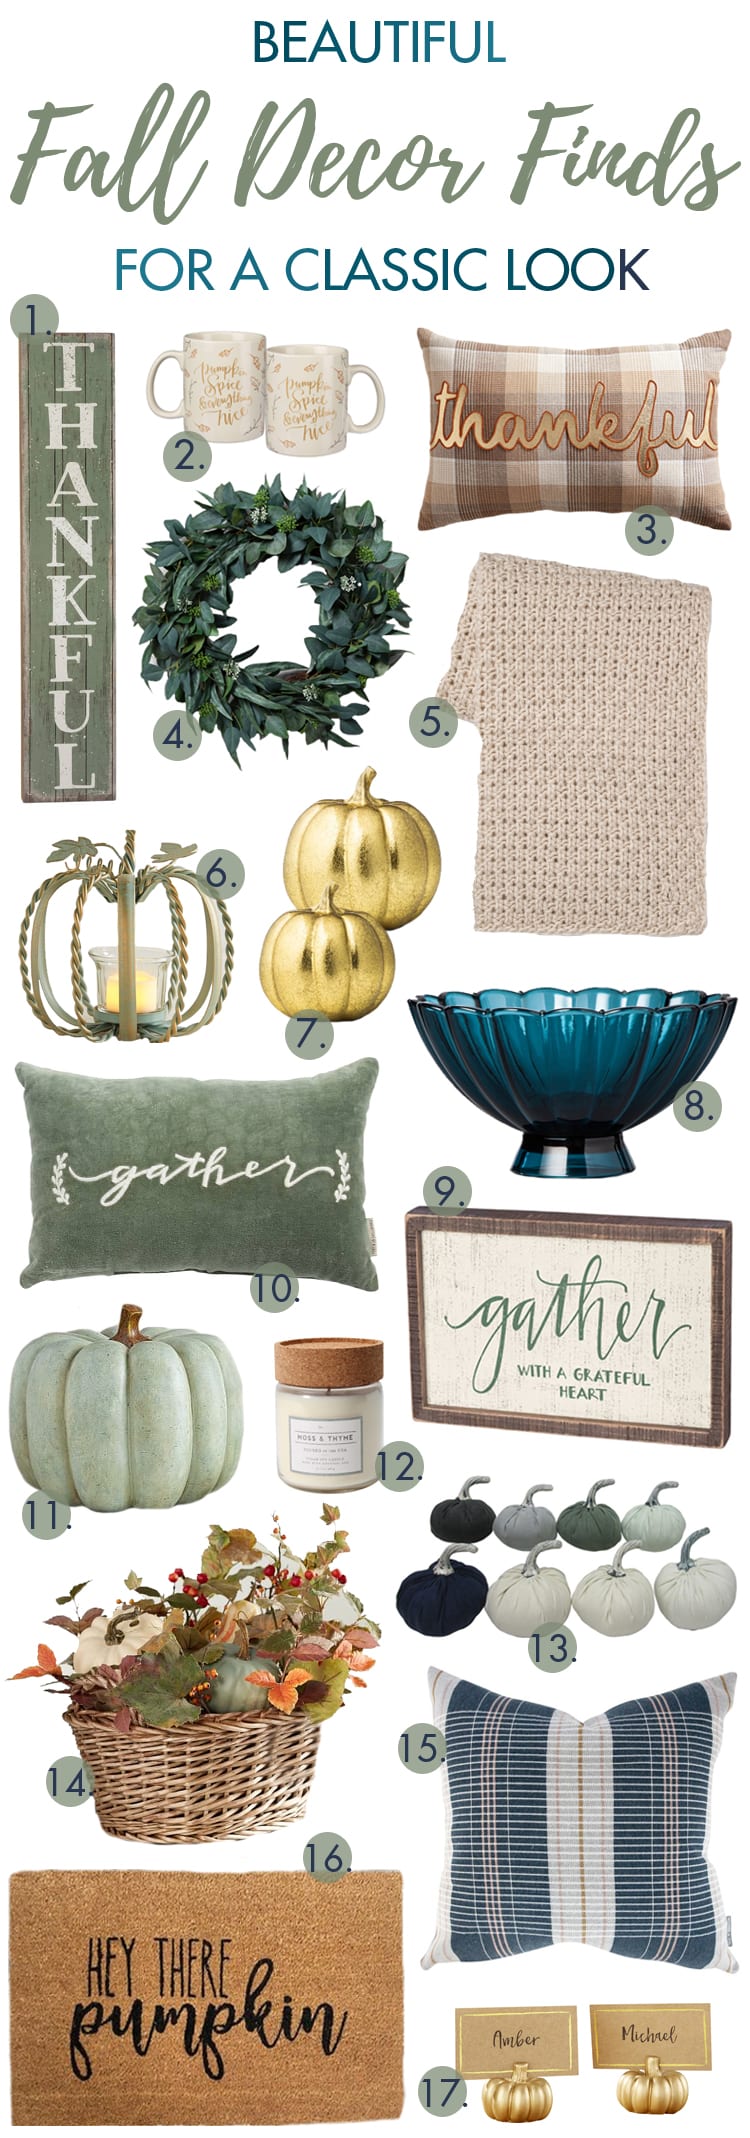 Beautiful Fall Decor Finds for a Classic Look